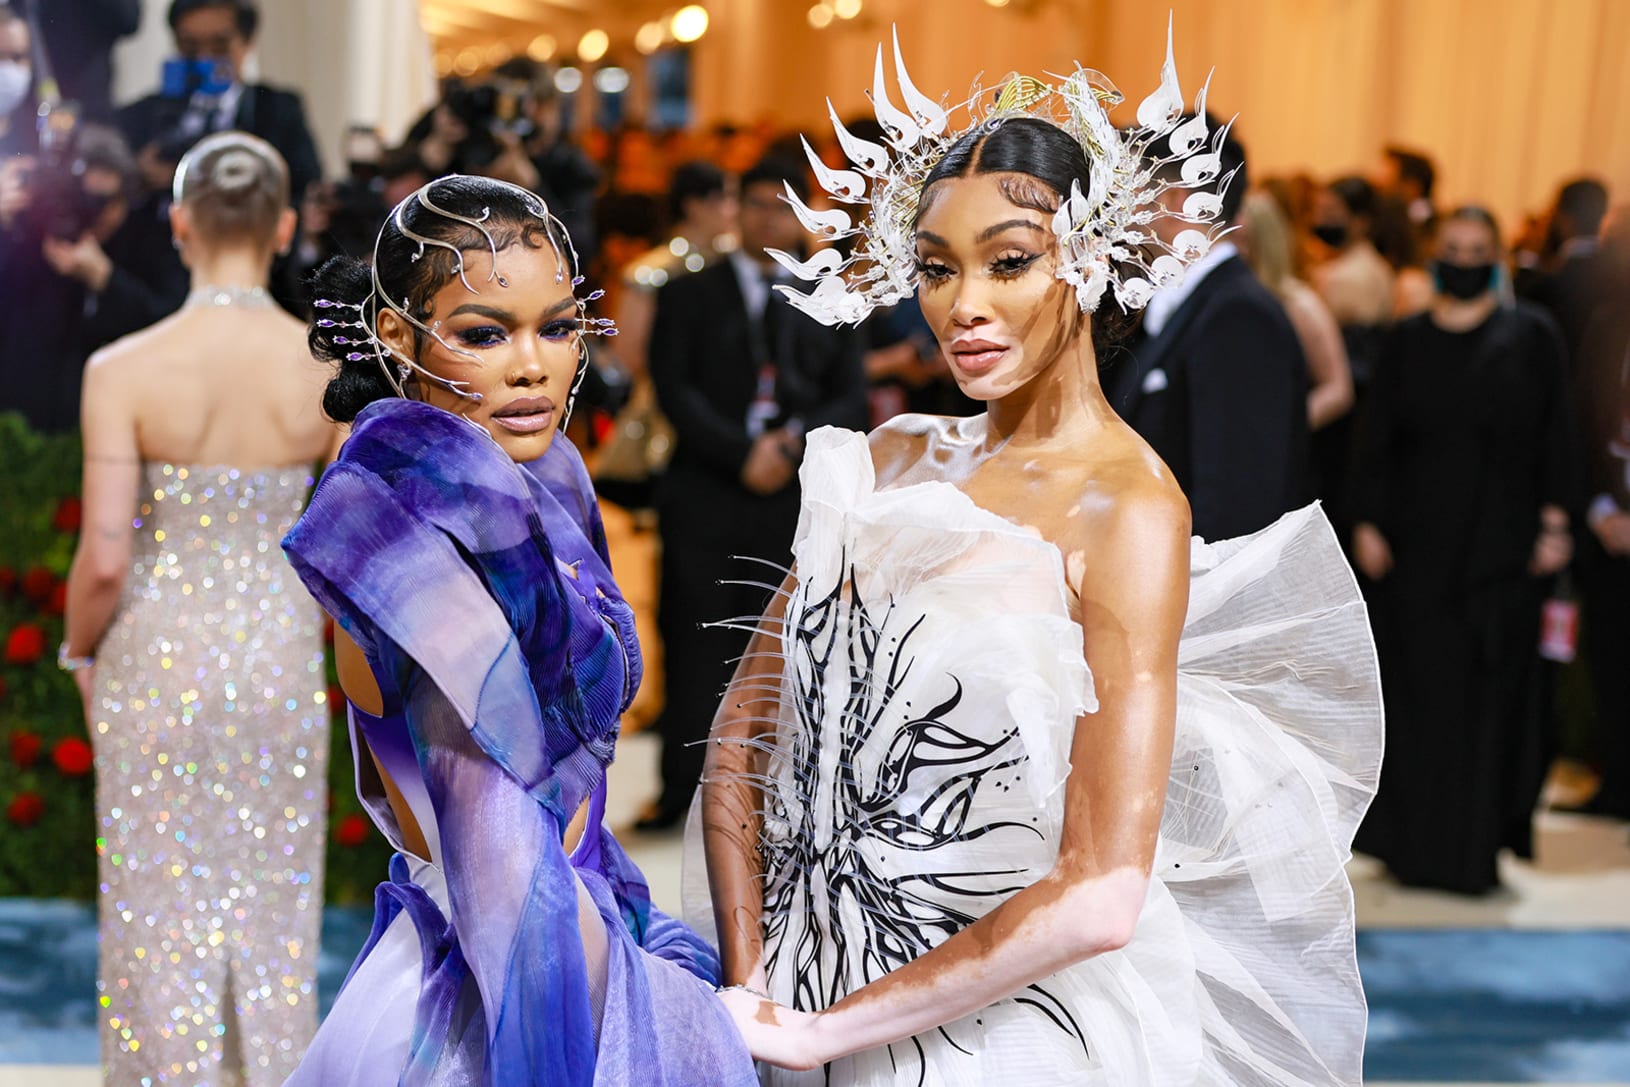 Winnie Harlow and Teyana Taylor dazzled in Iris van Herpen ensembles and headpieces. Harlow opted for a black-and-white sculptural dress, while Taylor wore a gauzy purple gown. Taylor told Vogue on the red carpet that it was a "futuristic" take on the "Gilded Glamour" theme but also like the villain Ursula from "The Little Mermaid."